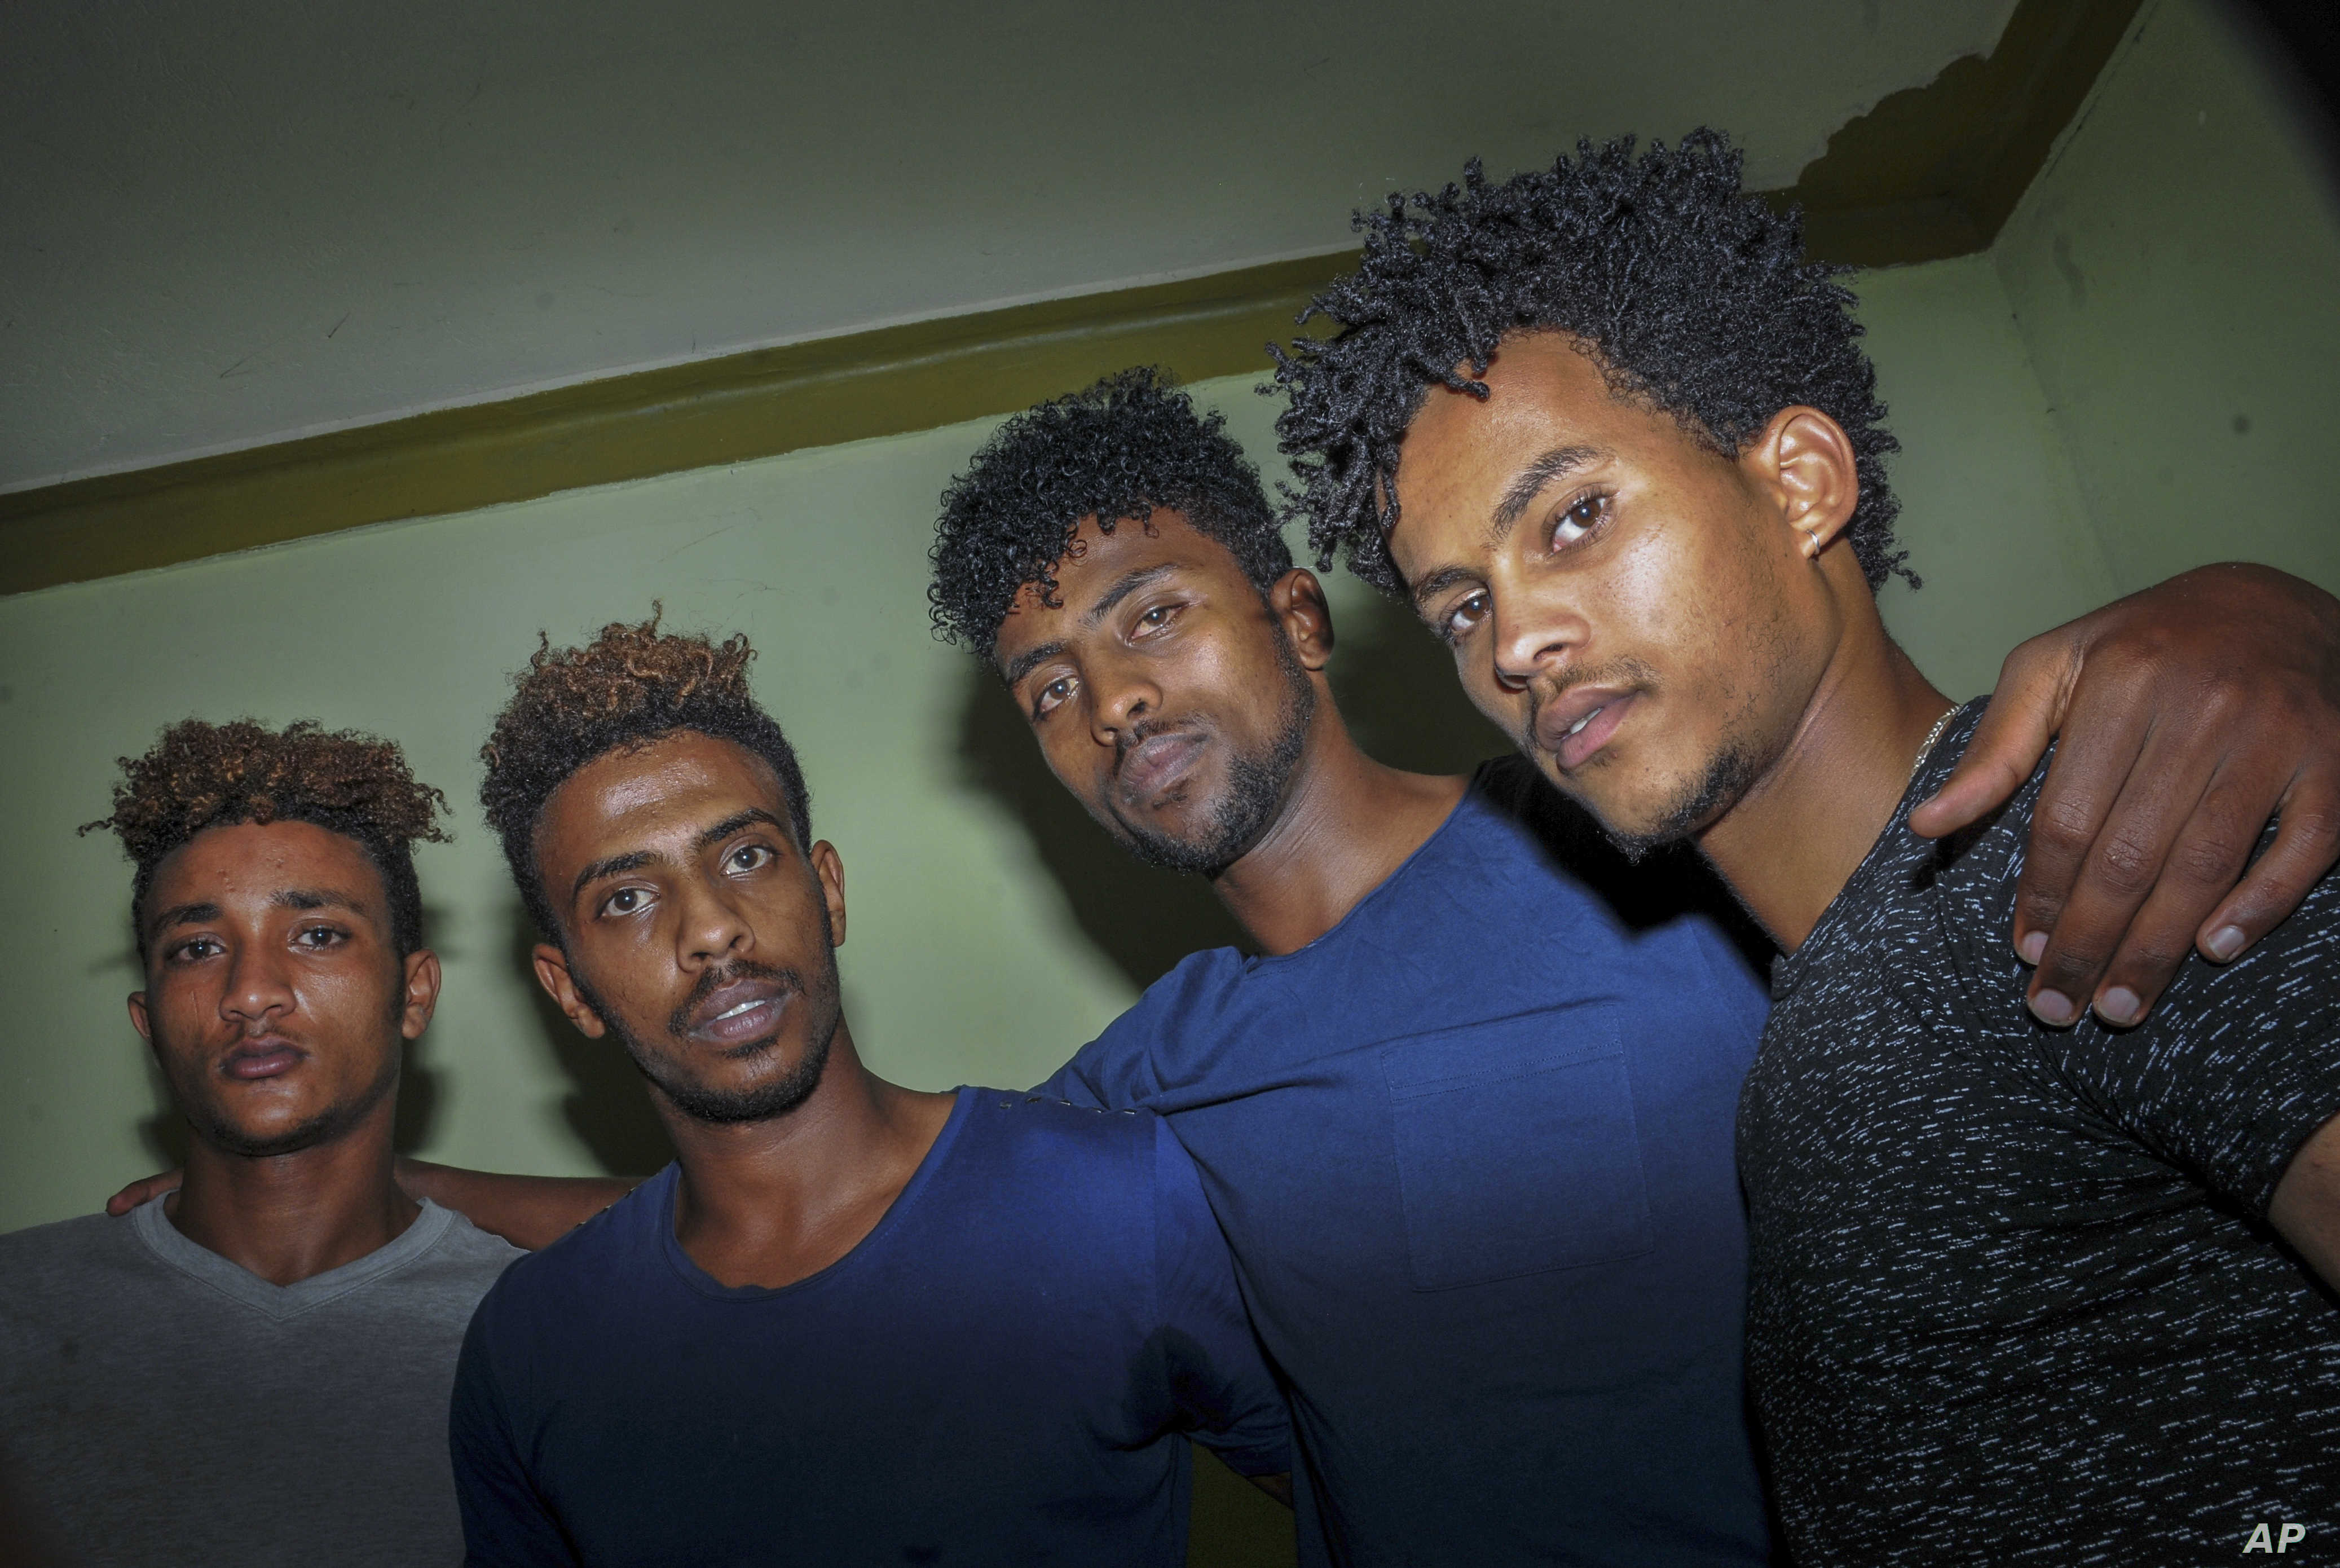 In this photo taken on Thursday, Oct. 10, 2019, from left, Eritrean under-20 soccer players Simon Asmelash Mekonen, Mewael Tesfai Yosief, Hermon Fessehaye Yohannes, and Hanibal Girmay Tekle talk together in a house where they are staying in Uganda. Four young players with Eritrea's national under-20 soccer team have defected during a tournament in Uganda, the latest players to leave one of the world's most tightly controlled regimes. (AP Photo)